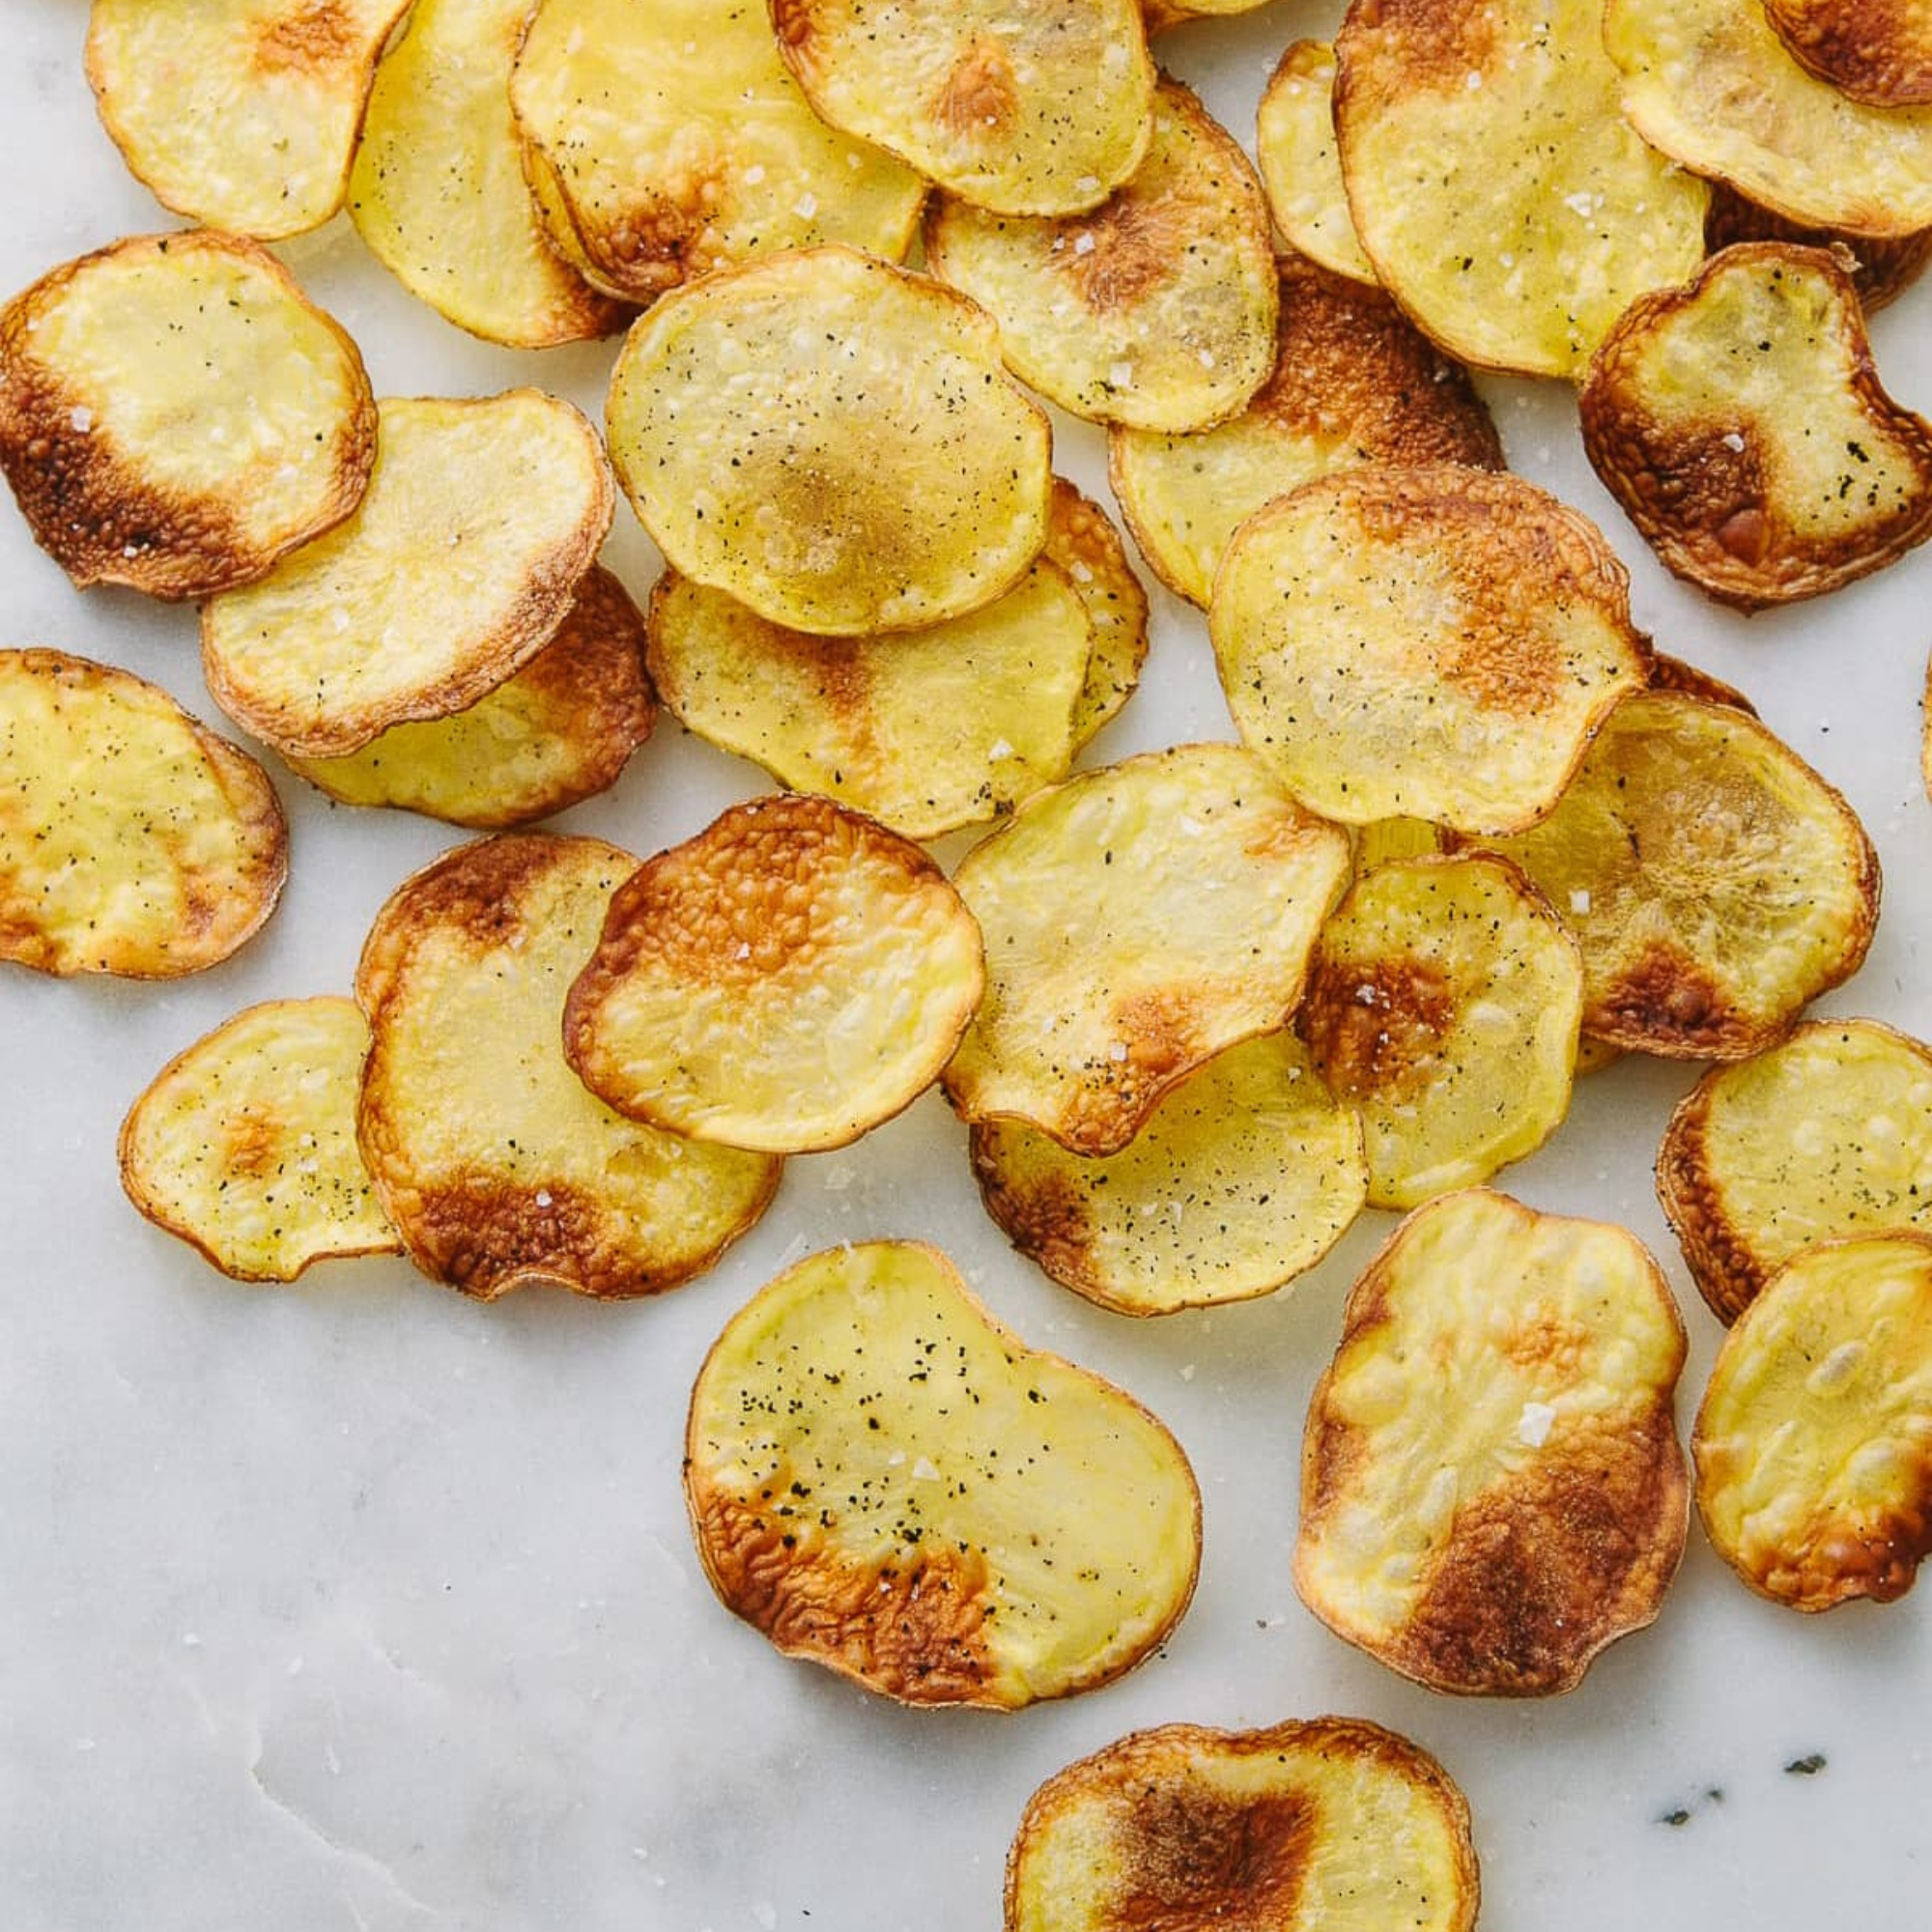 homemade baked potato chips layed out on a white marble countertop